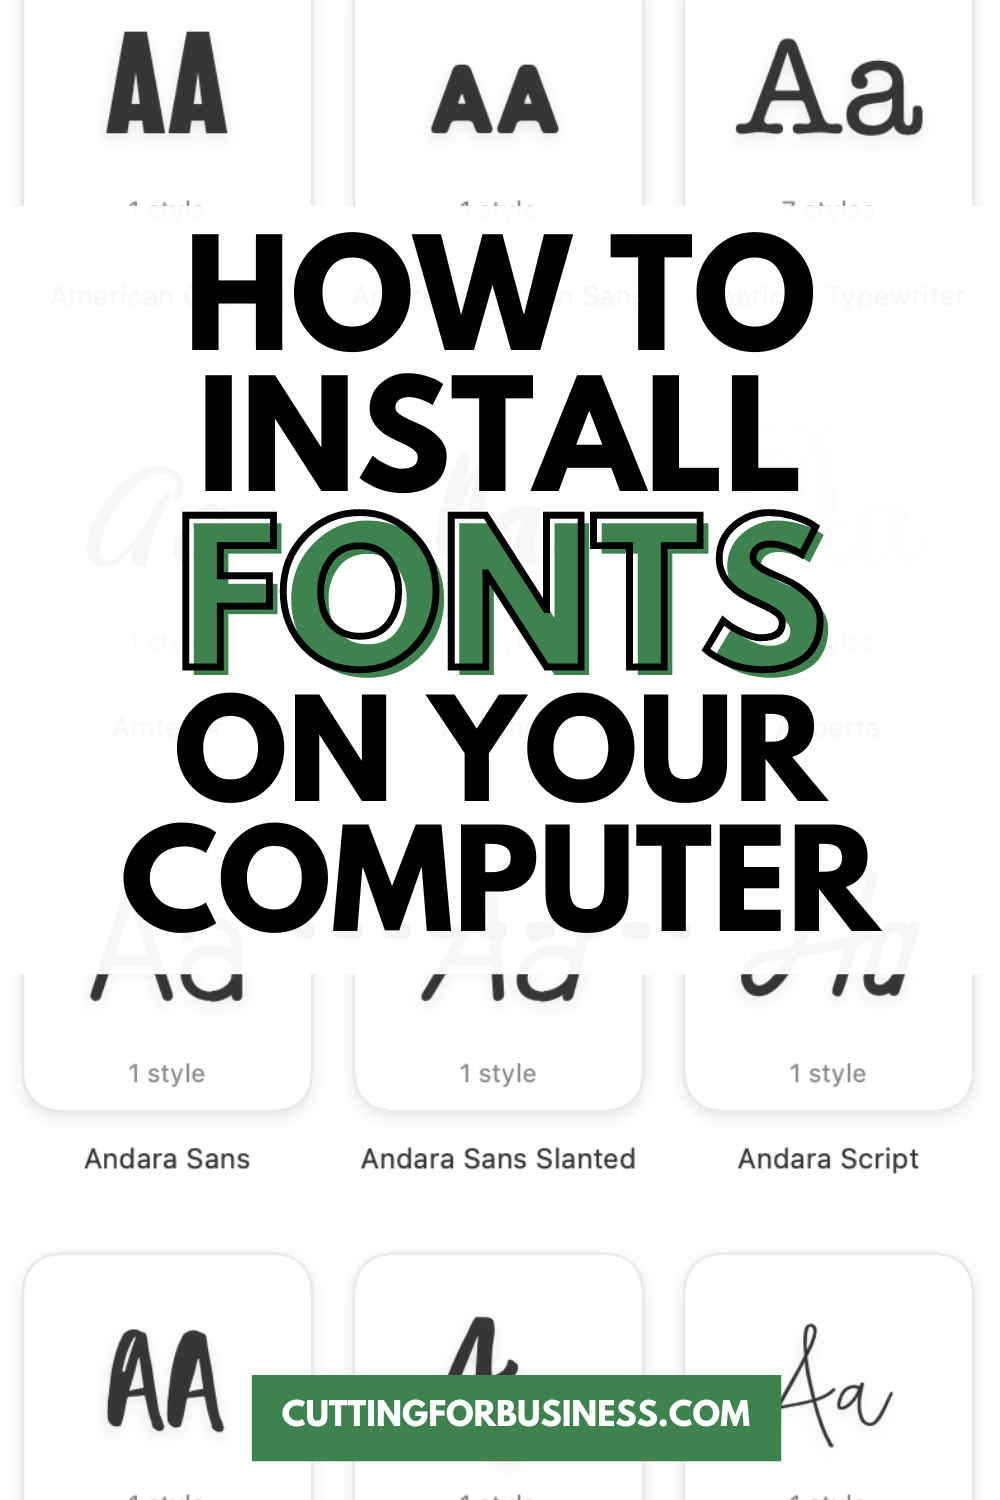 How to Install Fonts on Your Computer - cuttingforbusiness.com.